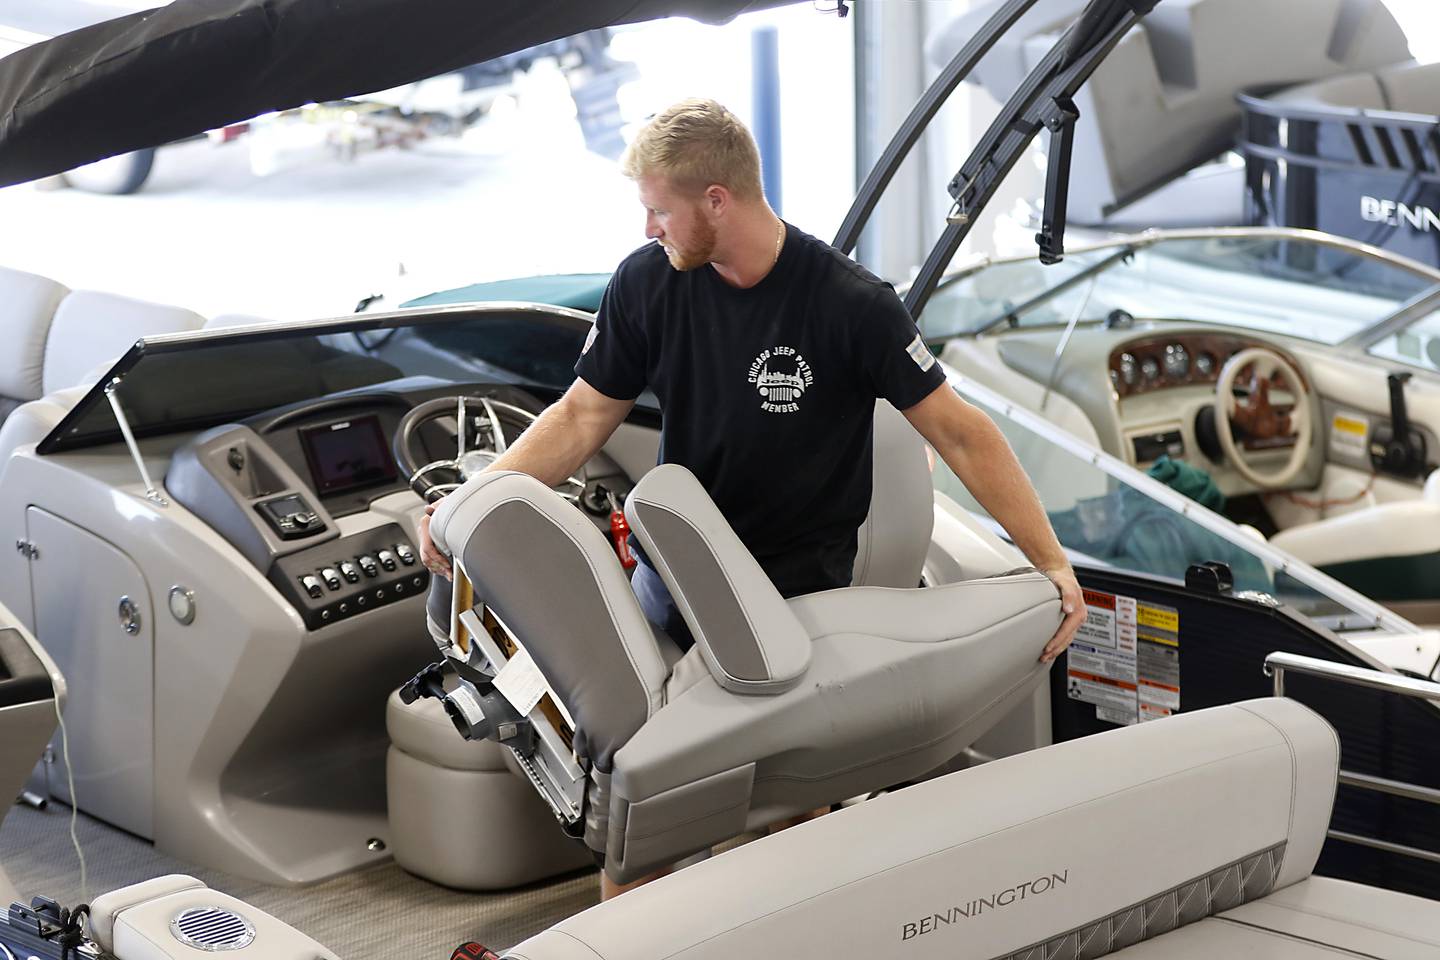 Mechanic Colin Wegner moves a seat a replaces the seat bases on a pontoon boat at Munson Marine, 3112 W. Lincoln Road, in McHenry, on Tuesday, Sept. 20, 2022. Munson Marine has brought the marina back to life after purchasing the derelict marina about two years ago.